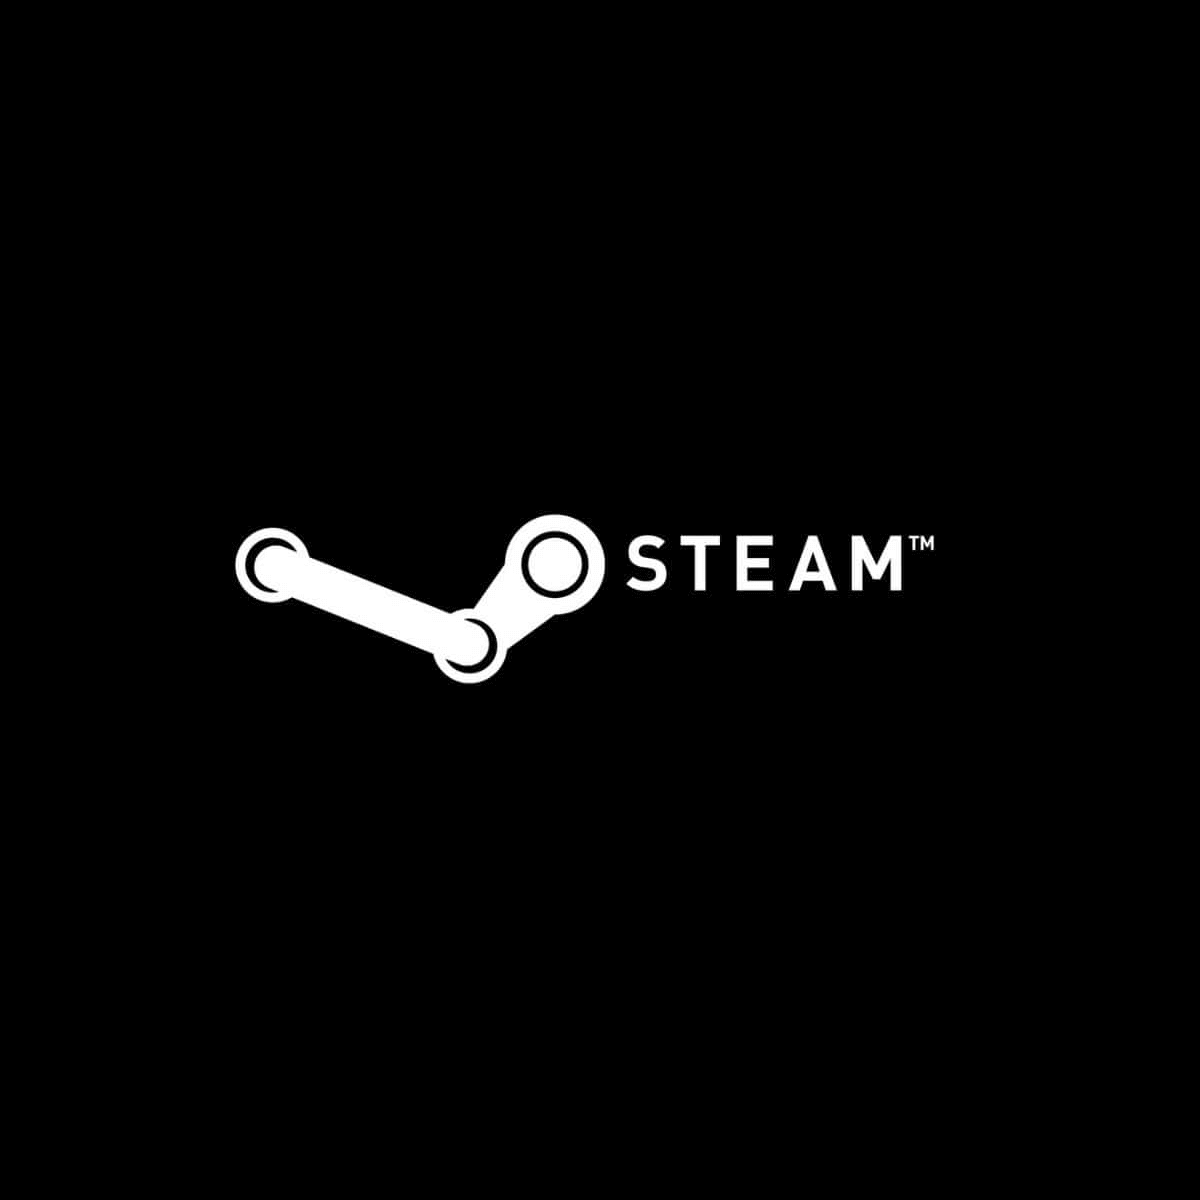 Fix Steam games launch issues on Windows 10